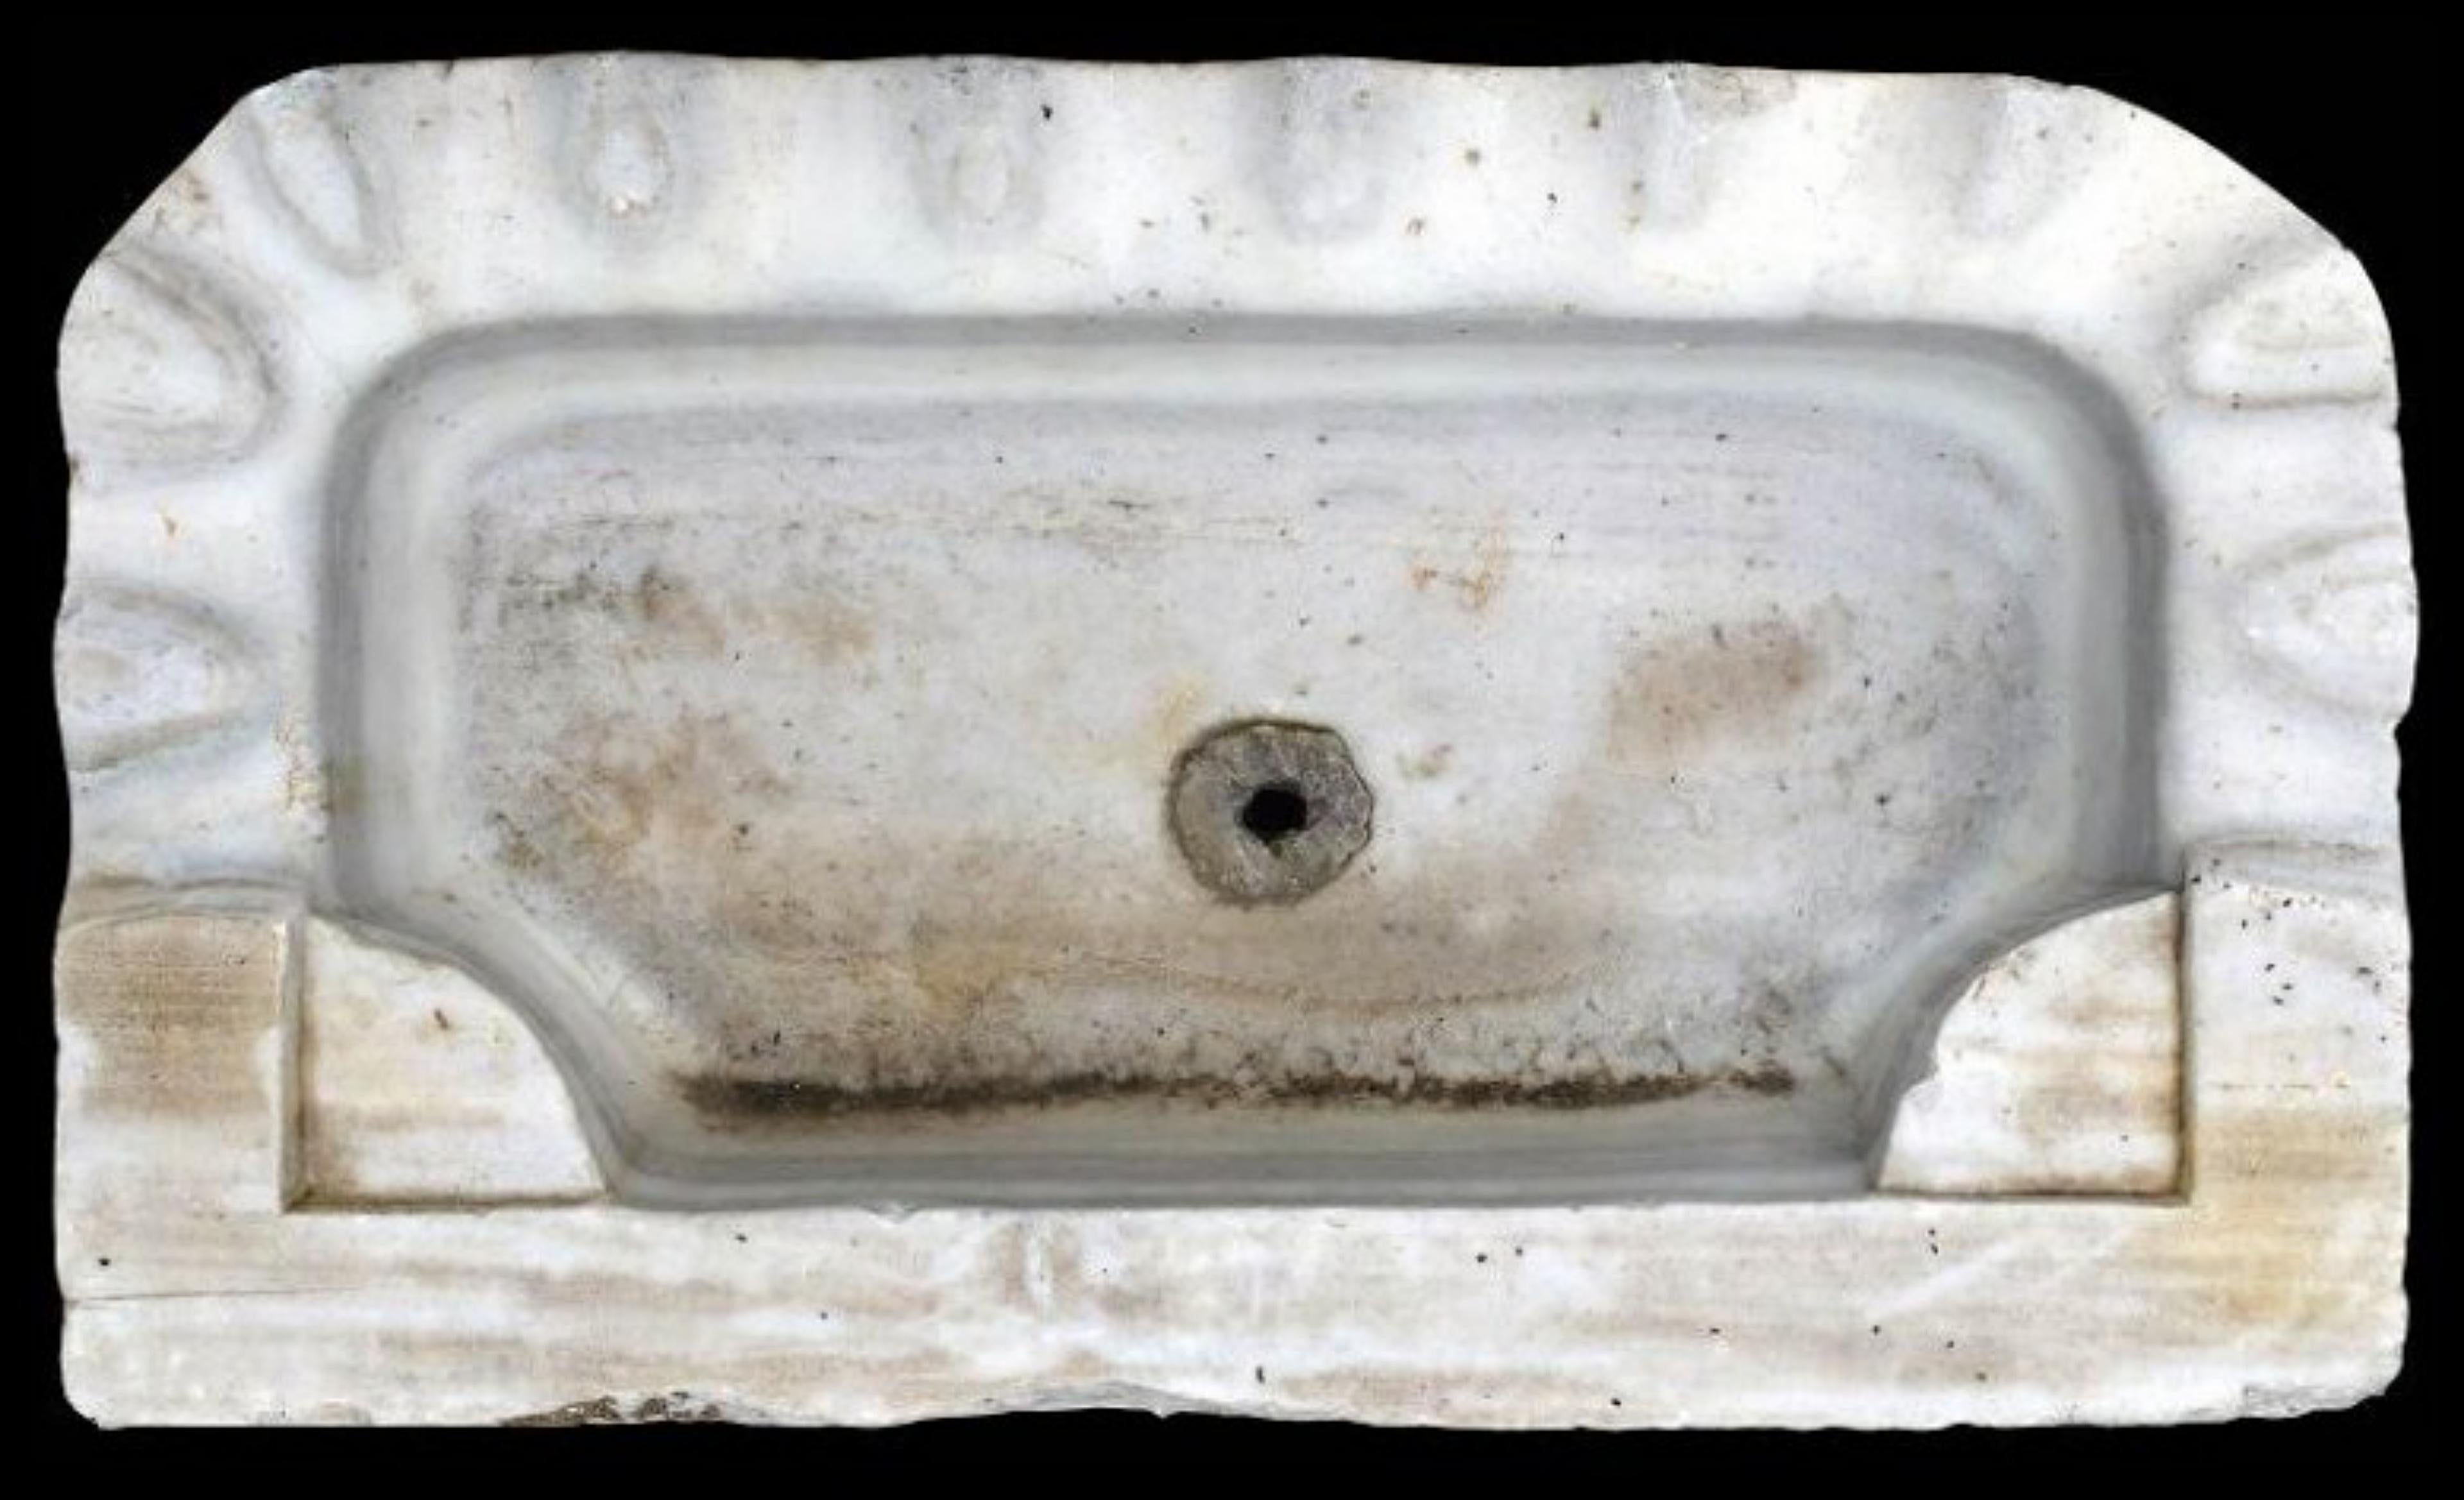 ANTIQUE ORIGINAL MARBLE WASHBASIN 18th Century

Original antique sink in white marble.
Dimensions of the hole cm.44x21x10

WIDTH 55cm
DEPTH 33cm
THICKNESS 17cm